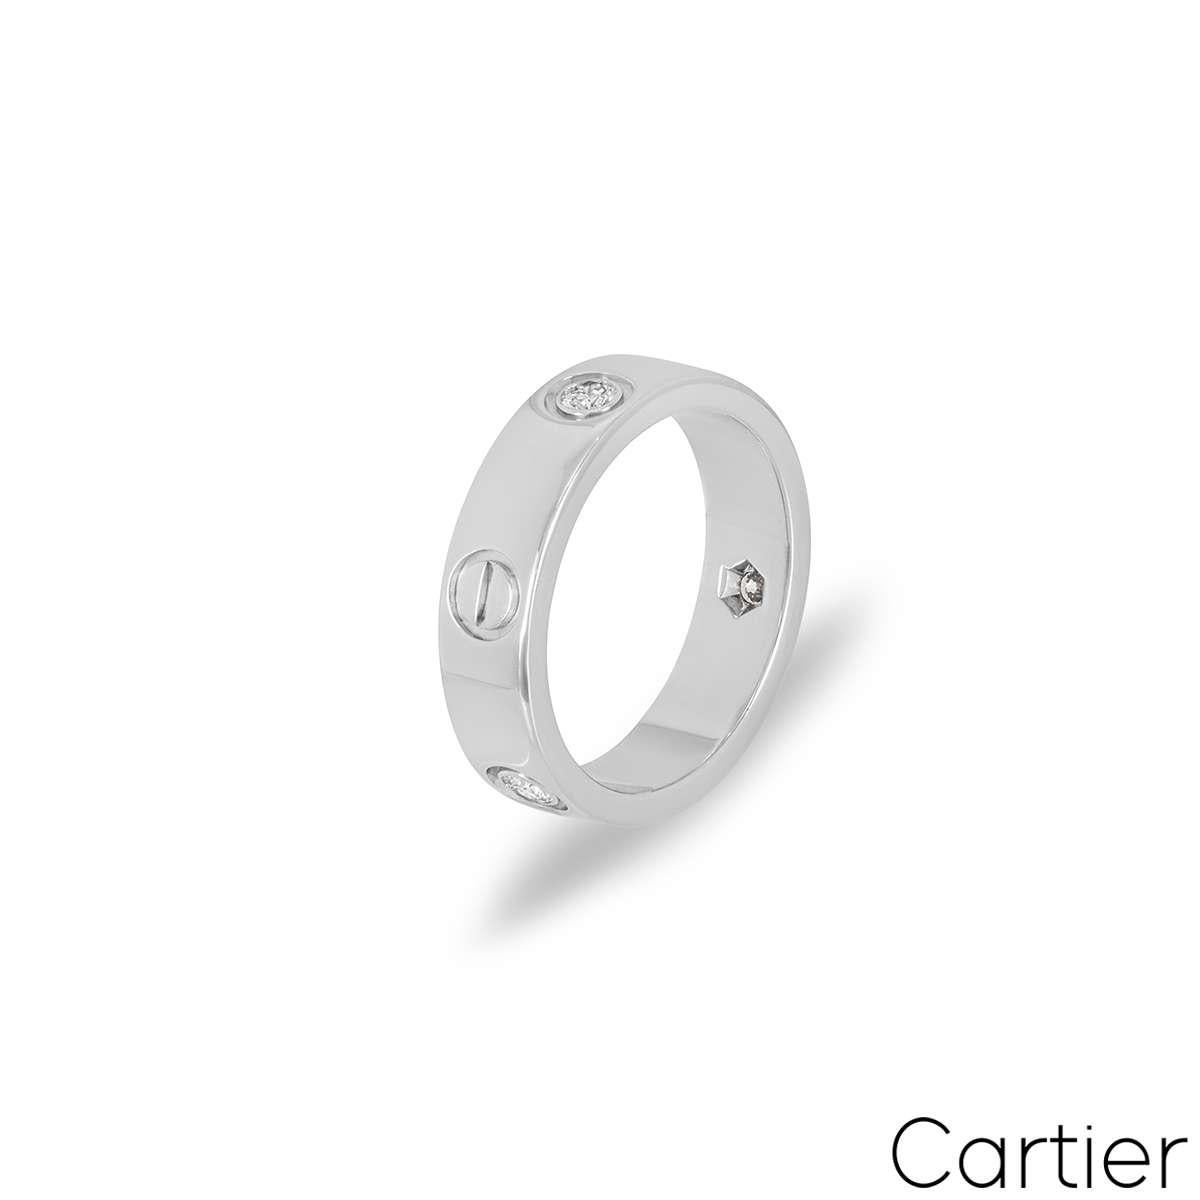 An 18k white gold ring from the Love collection by Cartier. The ring is set with 3 round brilliant cut diamonds totaling 0.22ct, alternating between the iconic screw motifs. 5.5mm wide, the ring is a size UK P - EU 56 and has a gross weight of 9.52